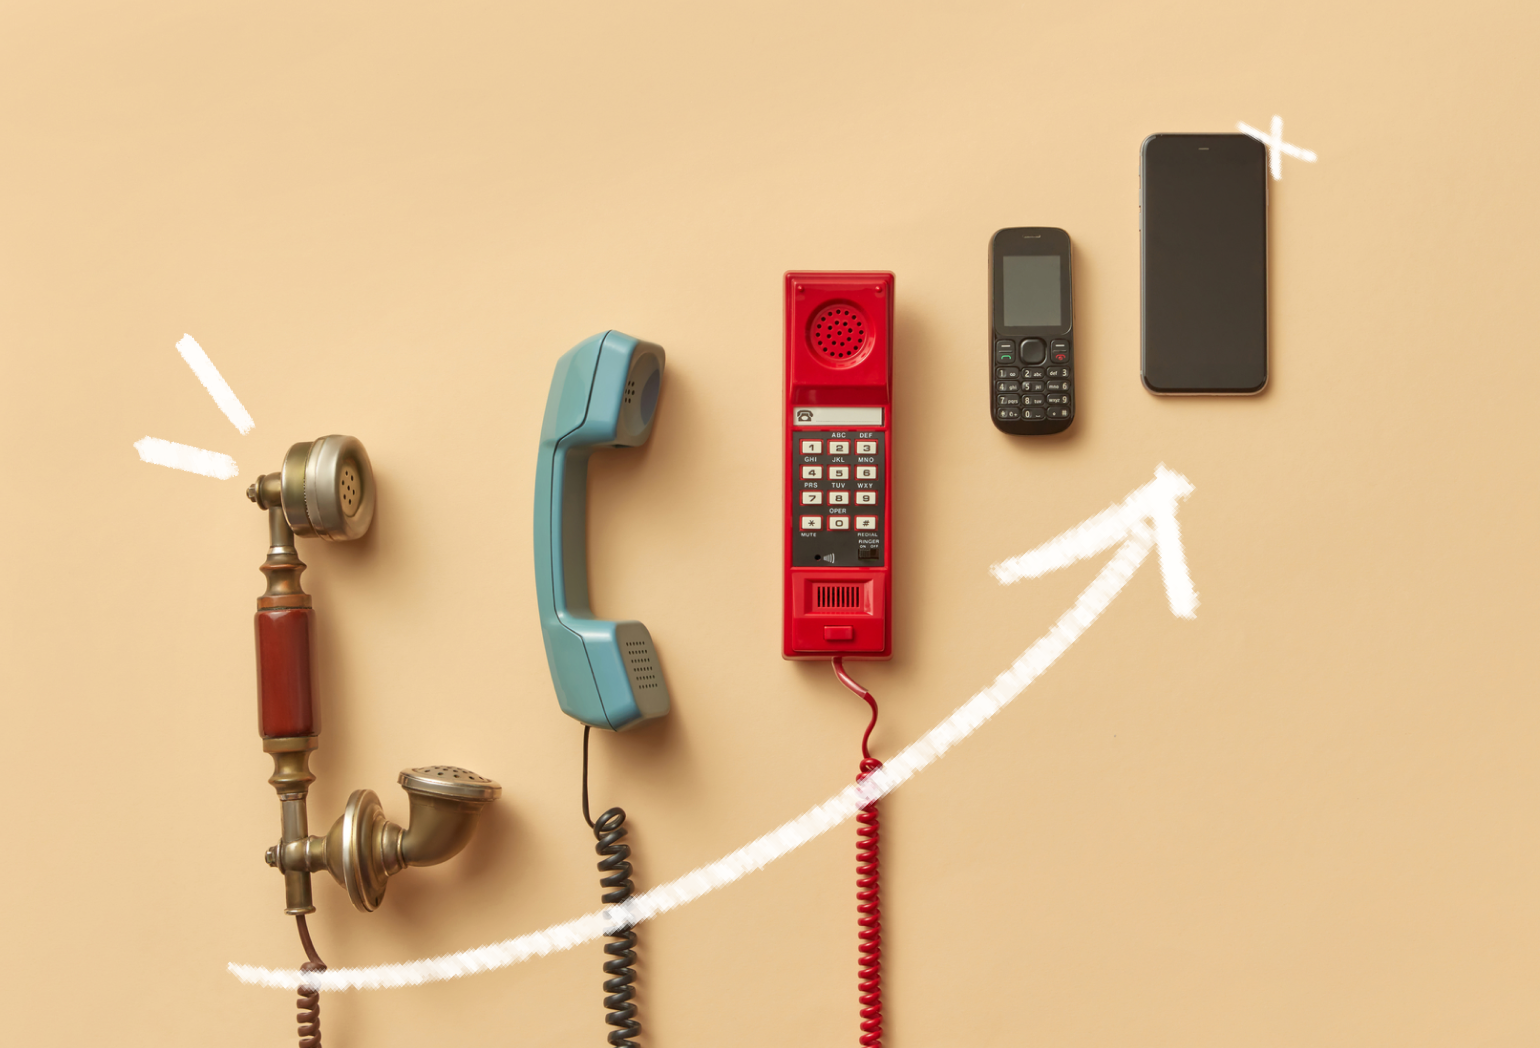 telephones over the years, history of collaboration